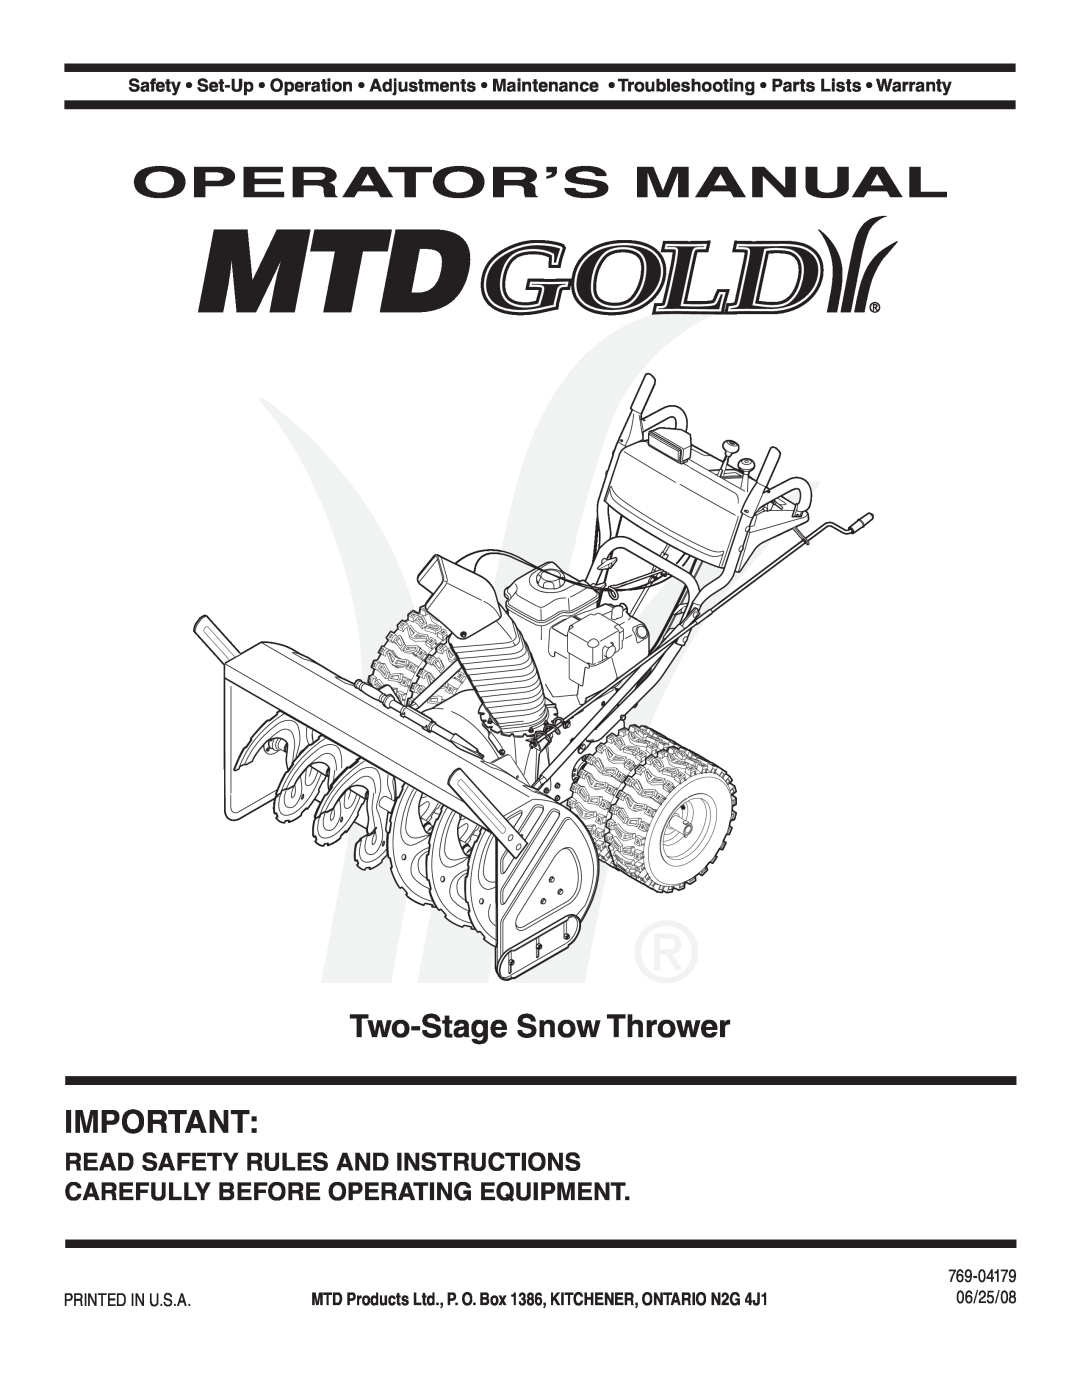 MTD 769-04179 warranty Operator’S Manual, Two-Stage Snow Thrower, Read Safety Rules And Instructions 